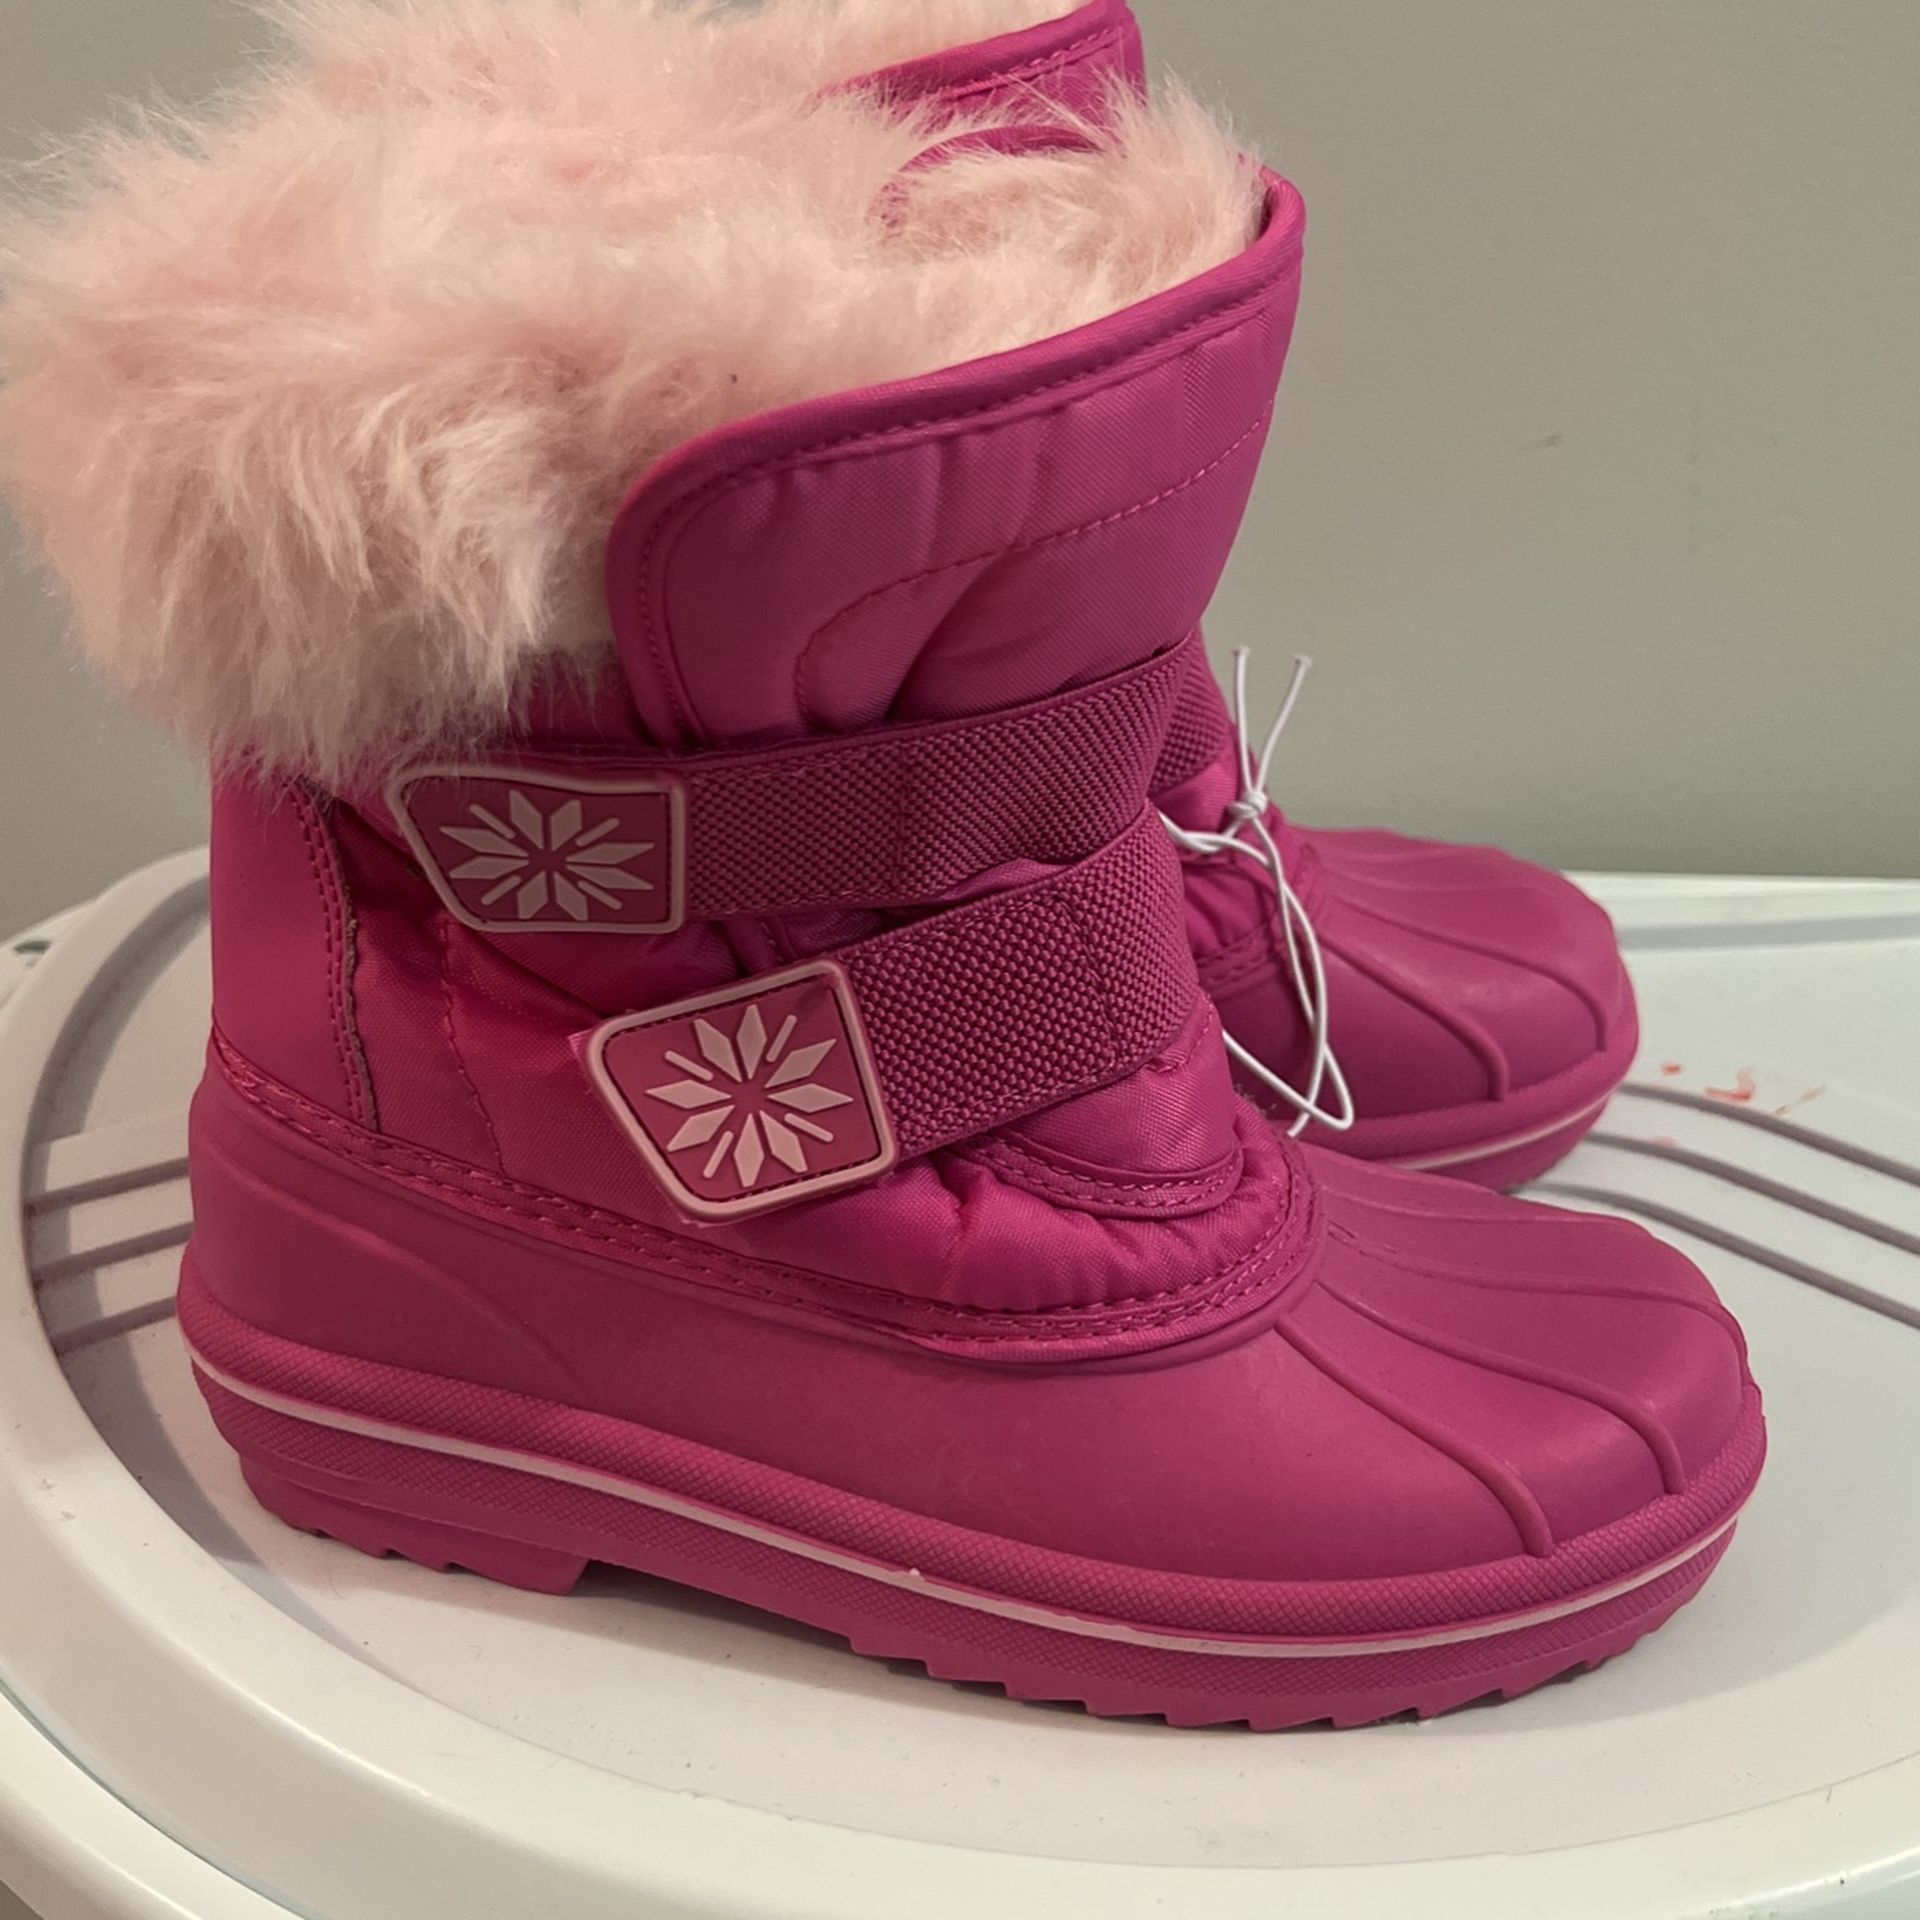 Girls Snow Boots “NEW”